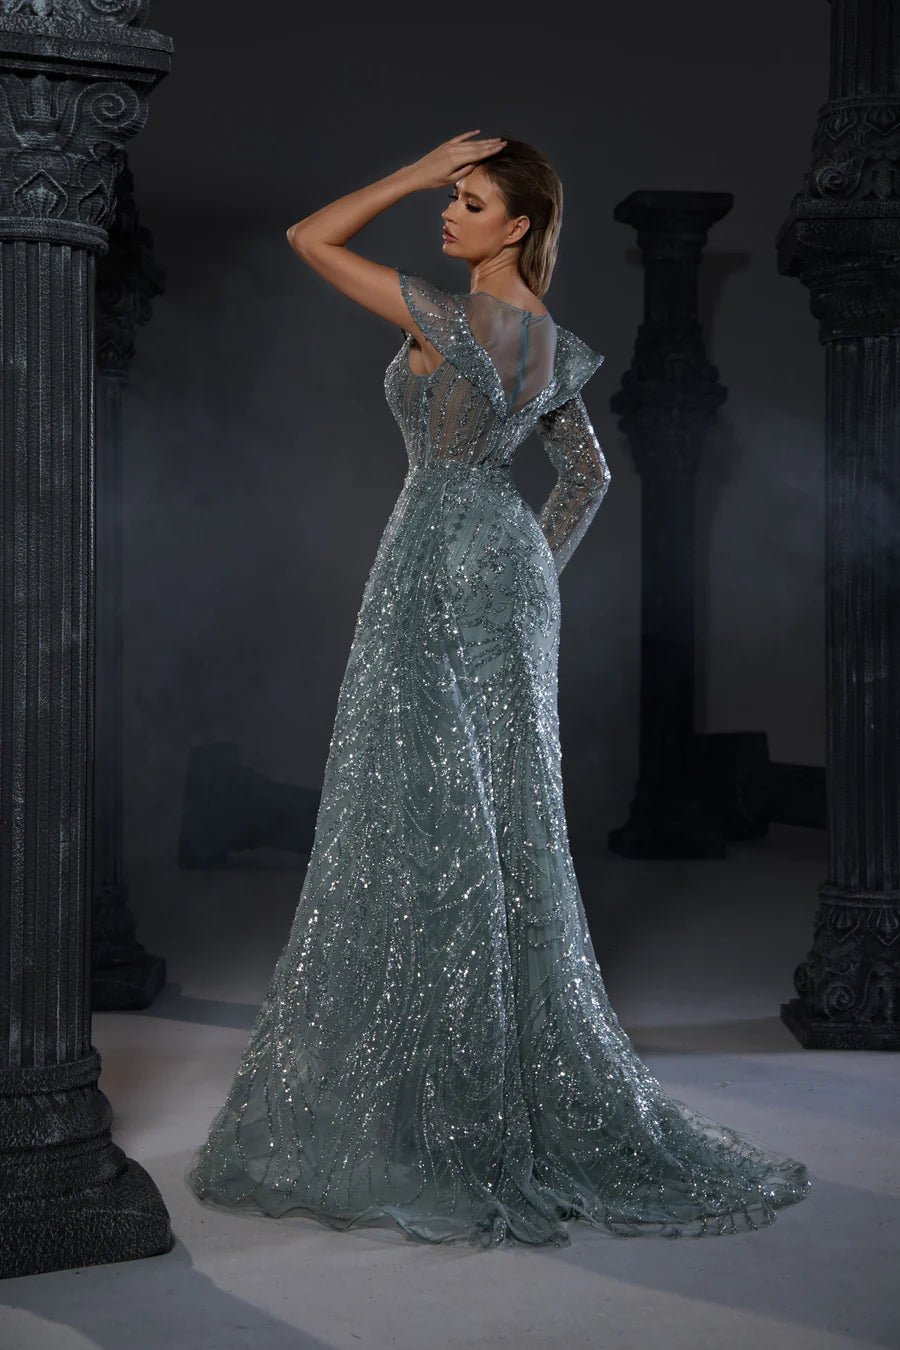 Gothic Grey Green One-Sleeve Blue Sequin Evening Gown with High Slit and Draped Detail - Designer Sequin Gown and Glitter Dress Plus Size - WonderlandByLilian